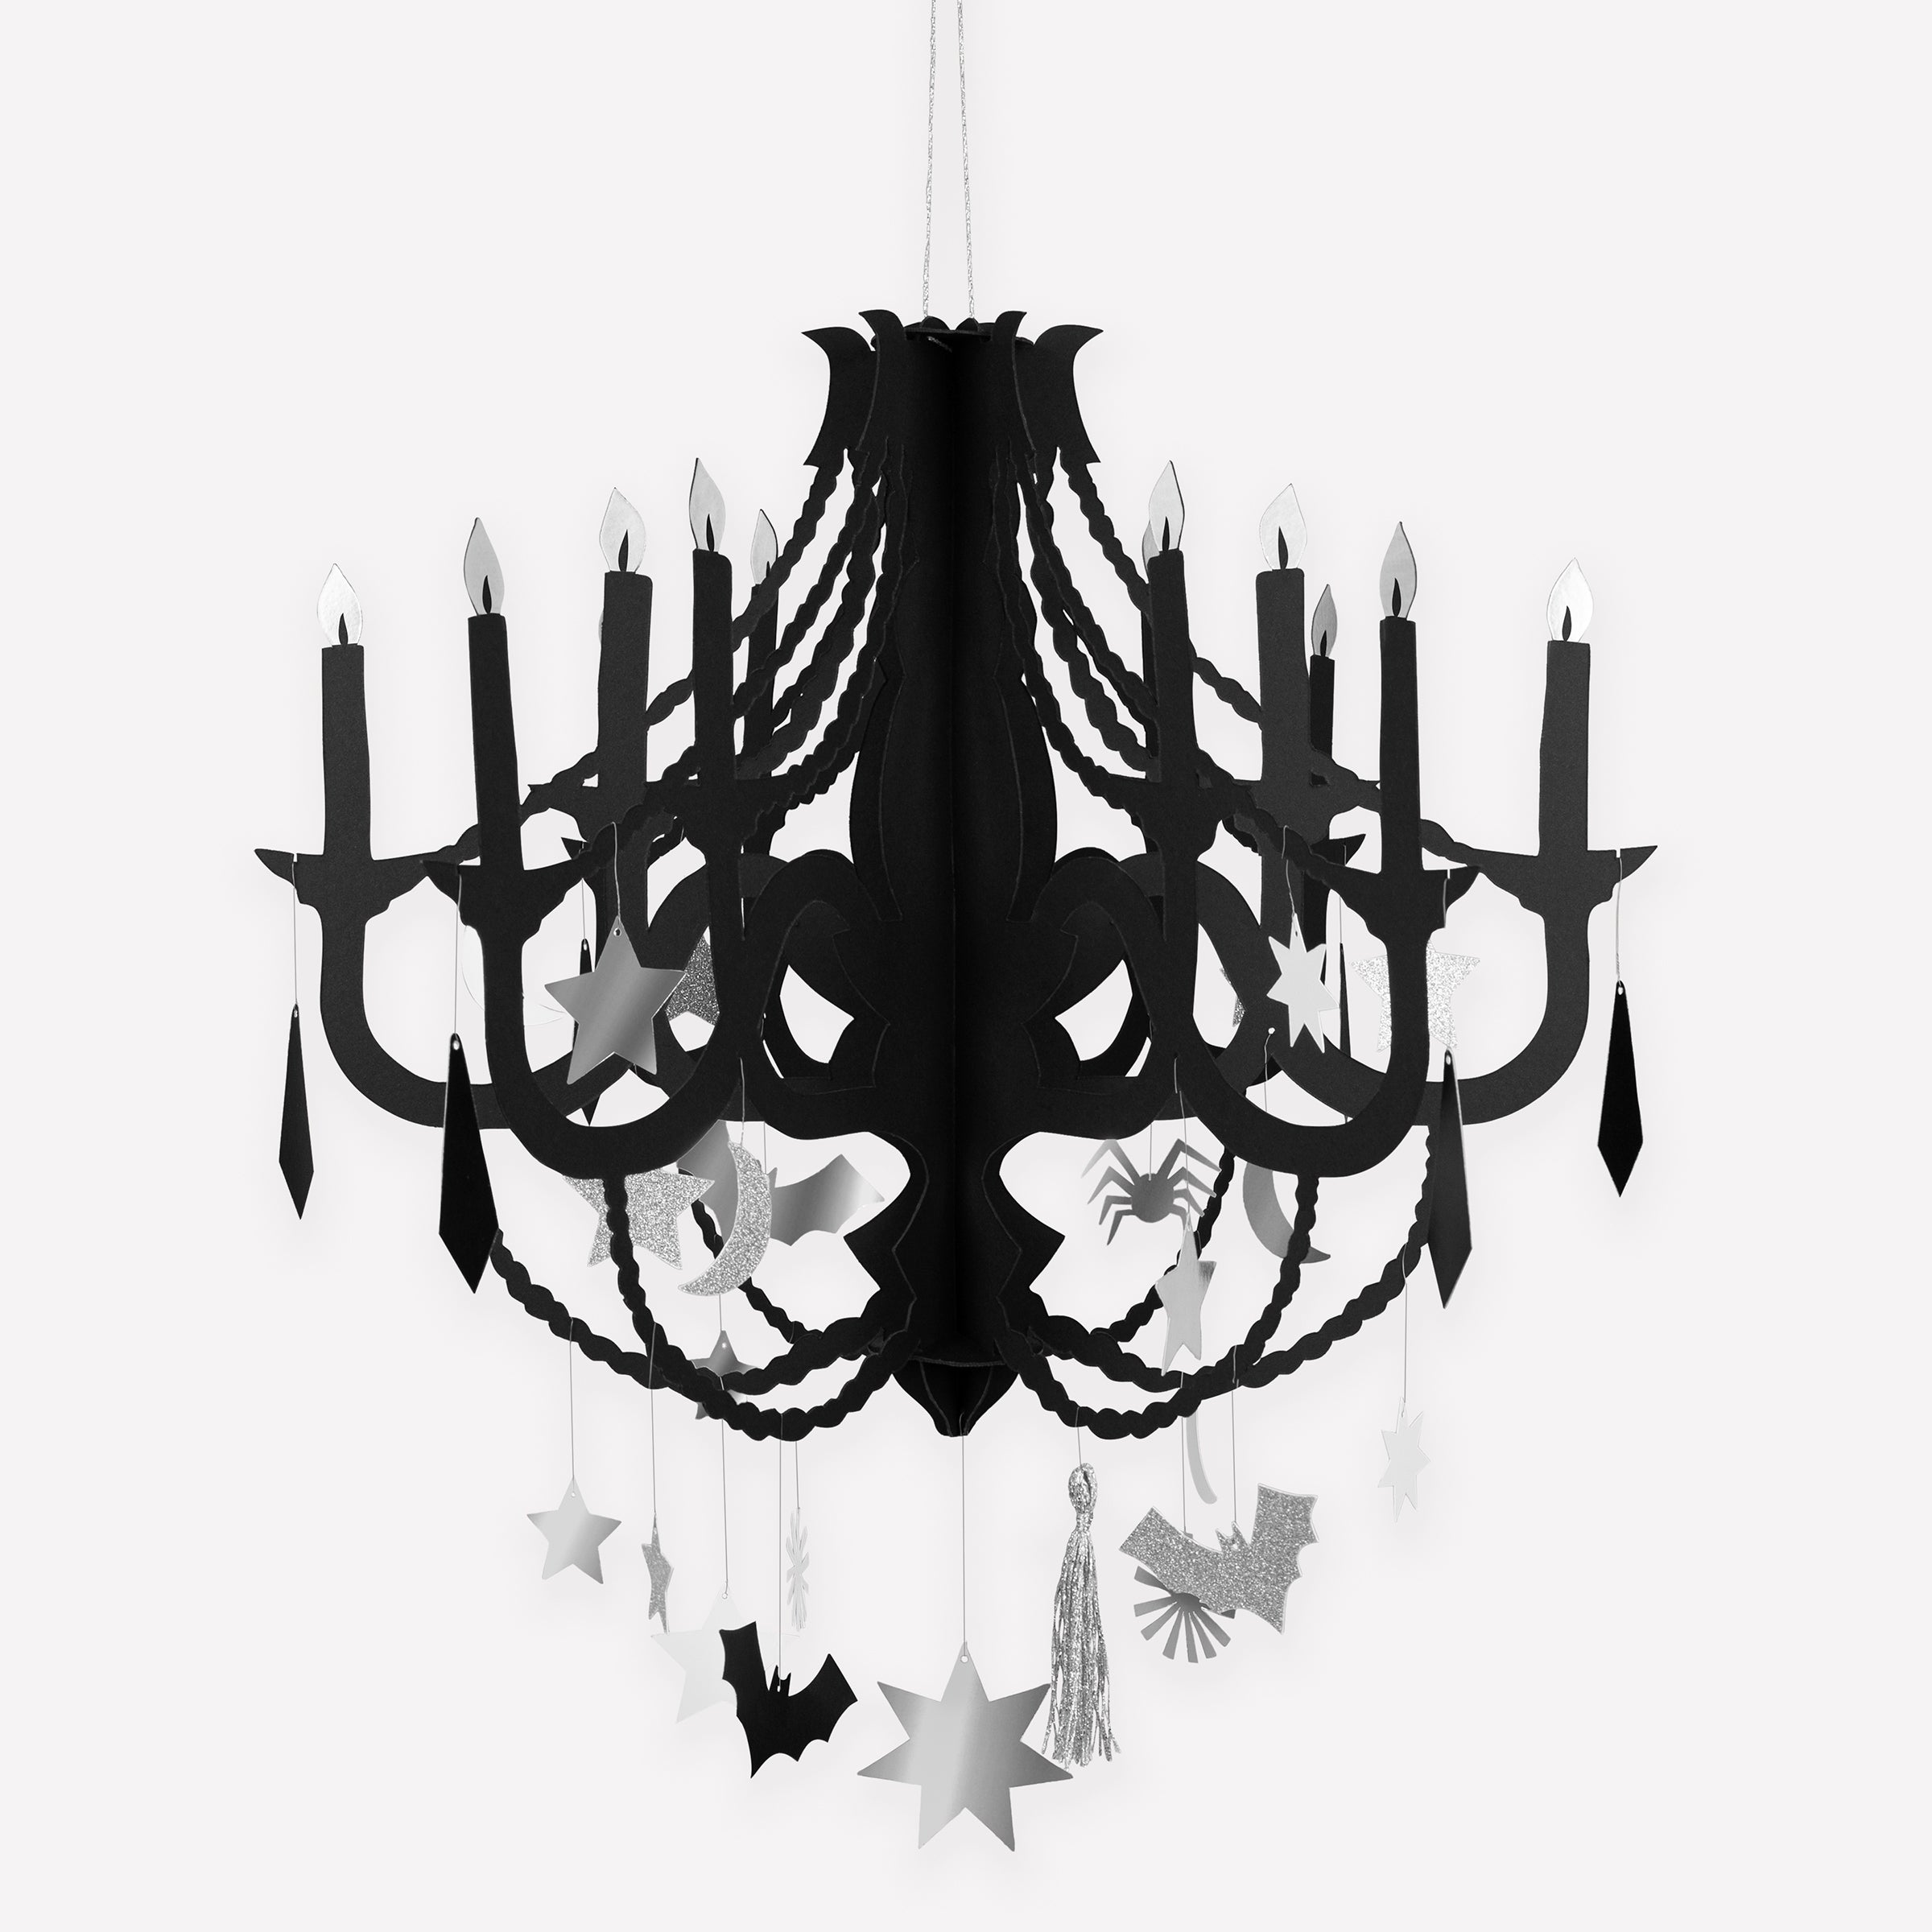 Our black chandelier, crafted from paper with shiny silver foil and 32 hanging decorations, is the perfect Halloween porch decoration.